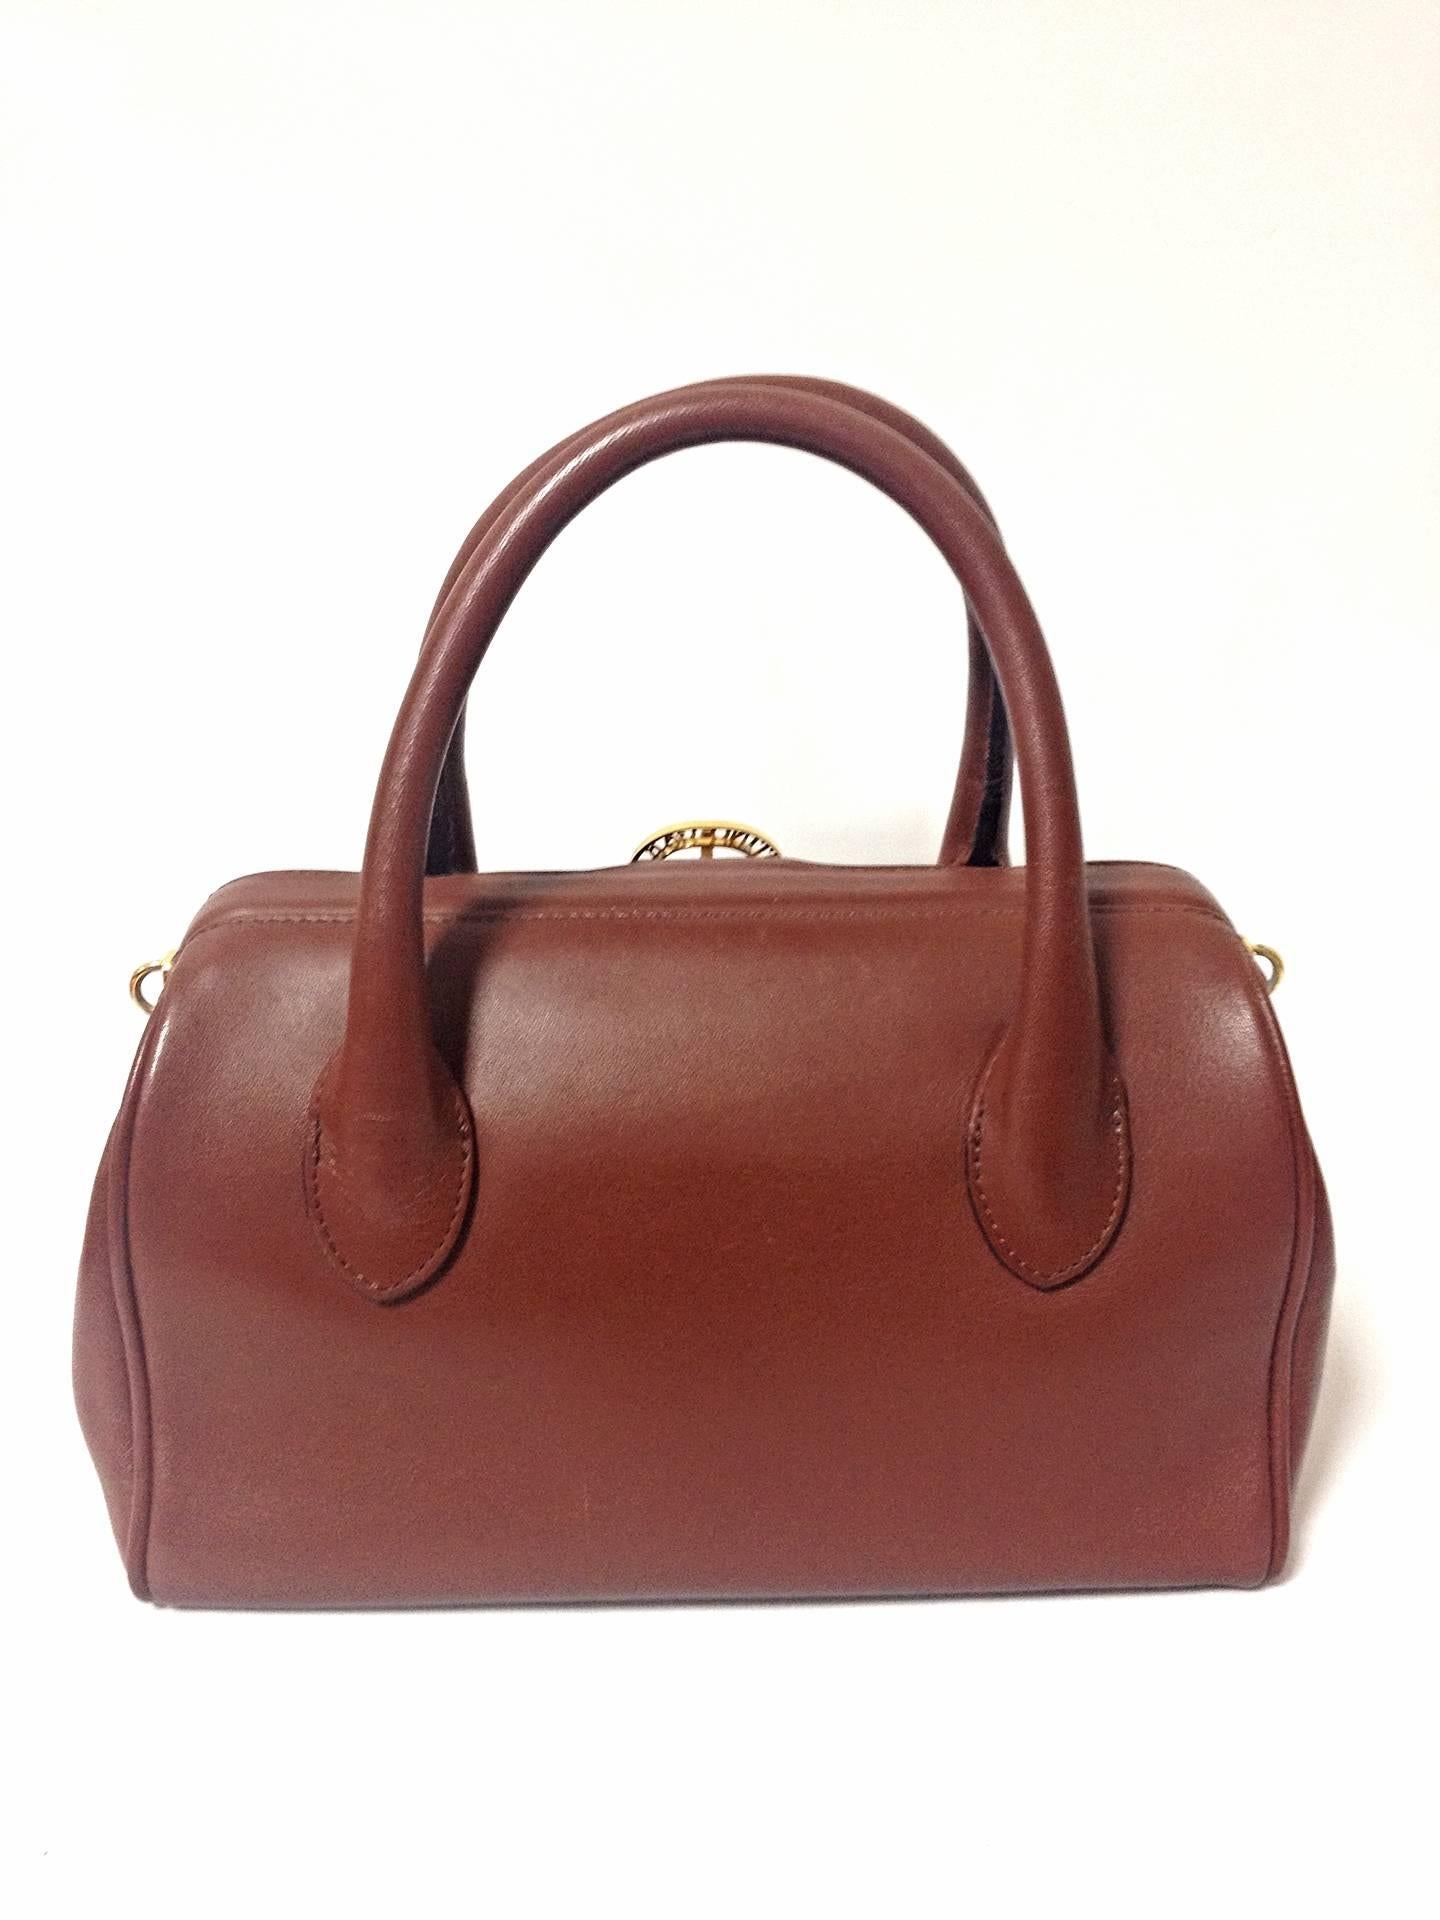 Vintage Valentino Garavani, brick brown leather mini handbag with golden logo cut out motif. Classic Valentino purse for any occasions.

This is the vintage Valentino Garavani brick brown leather purse approx early 90's.
Classic style that fits